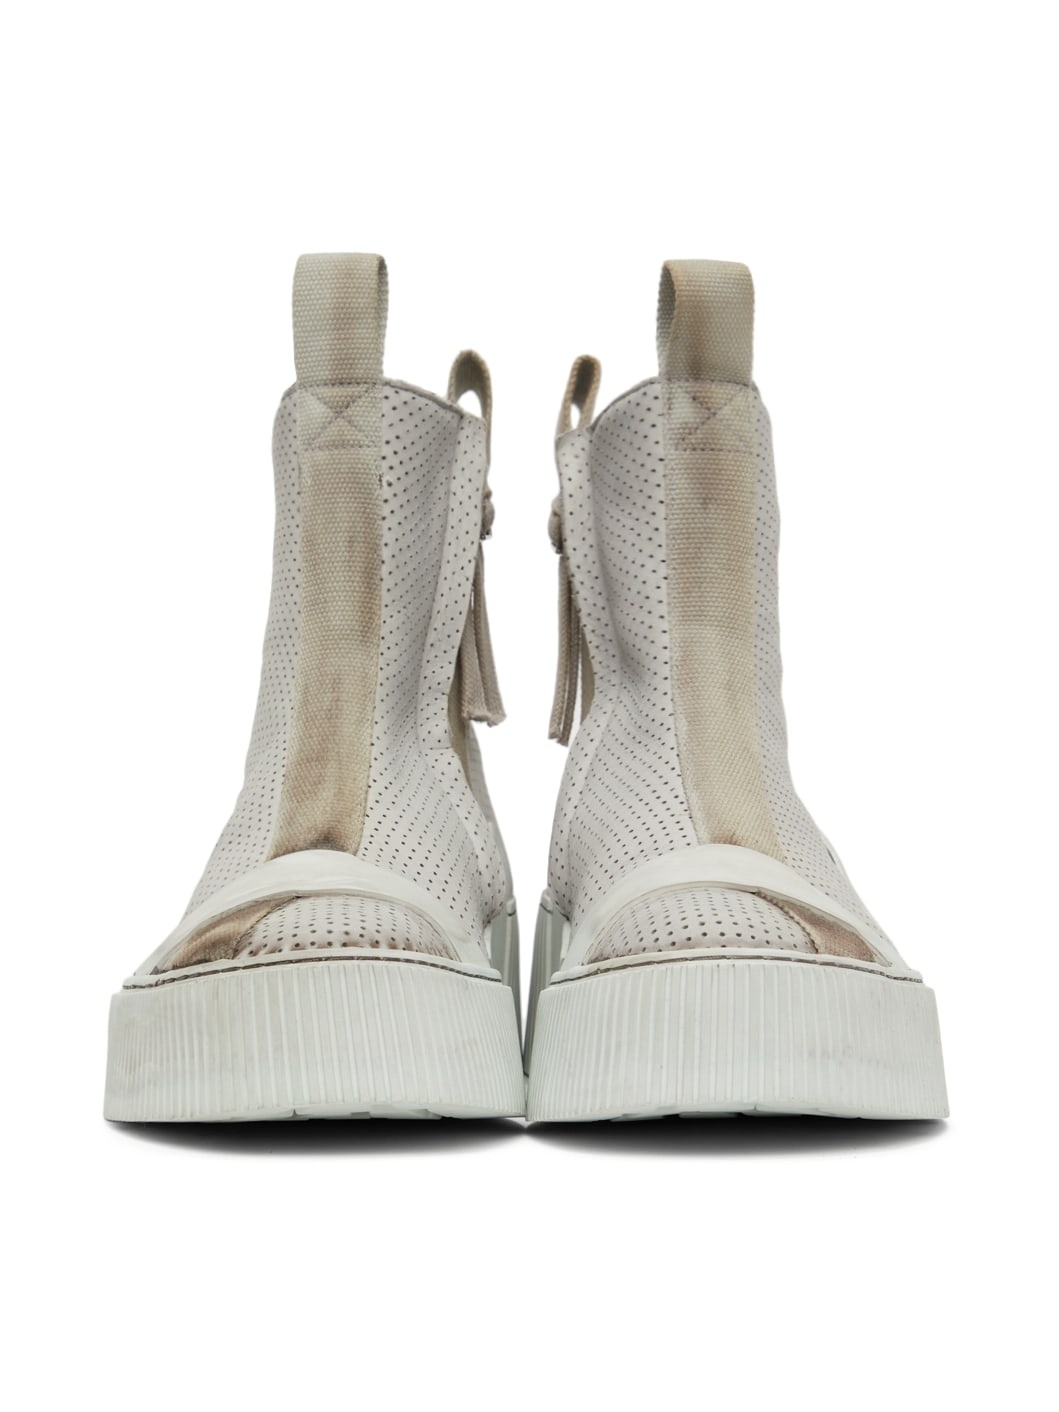 Off-White Bamba 3.1 High Top Sneakers - 2